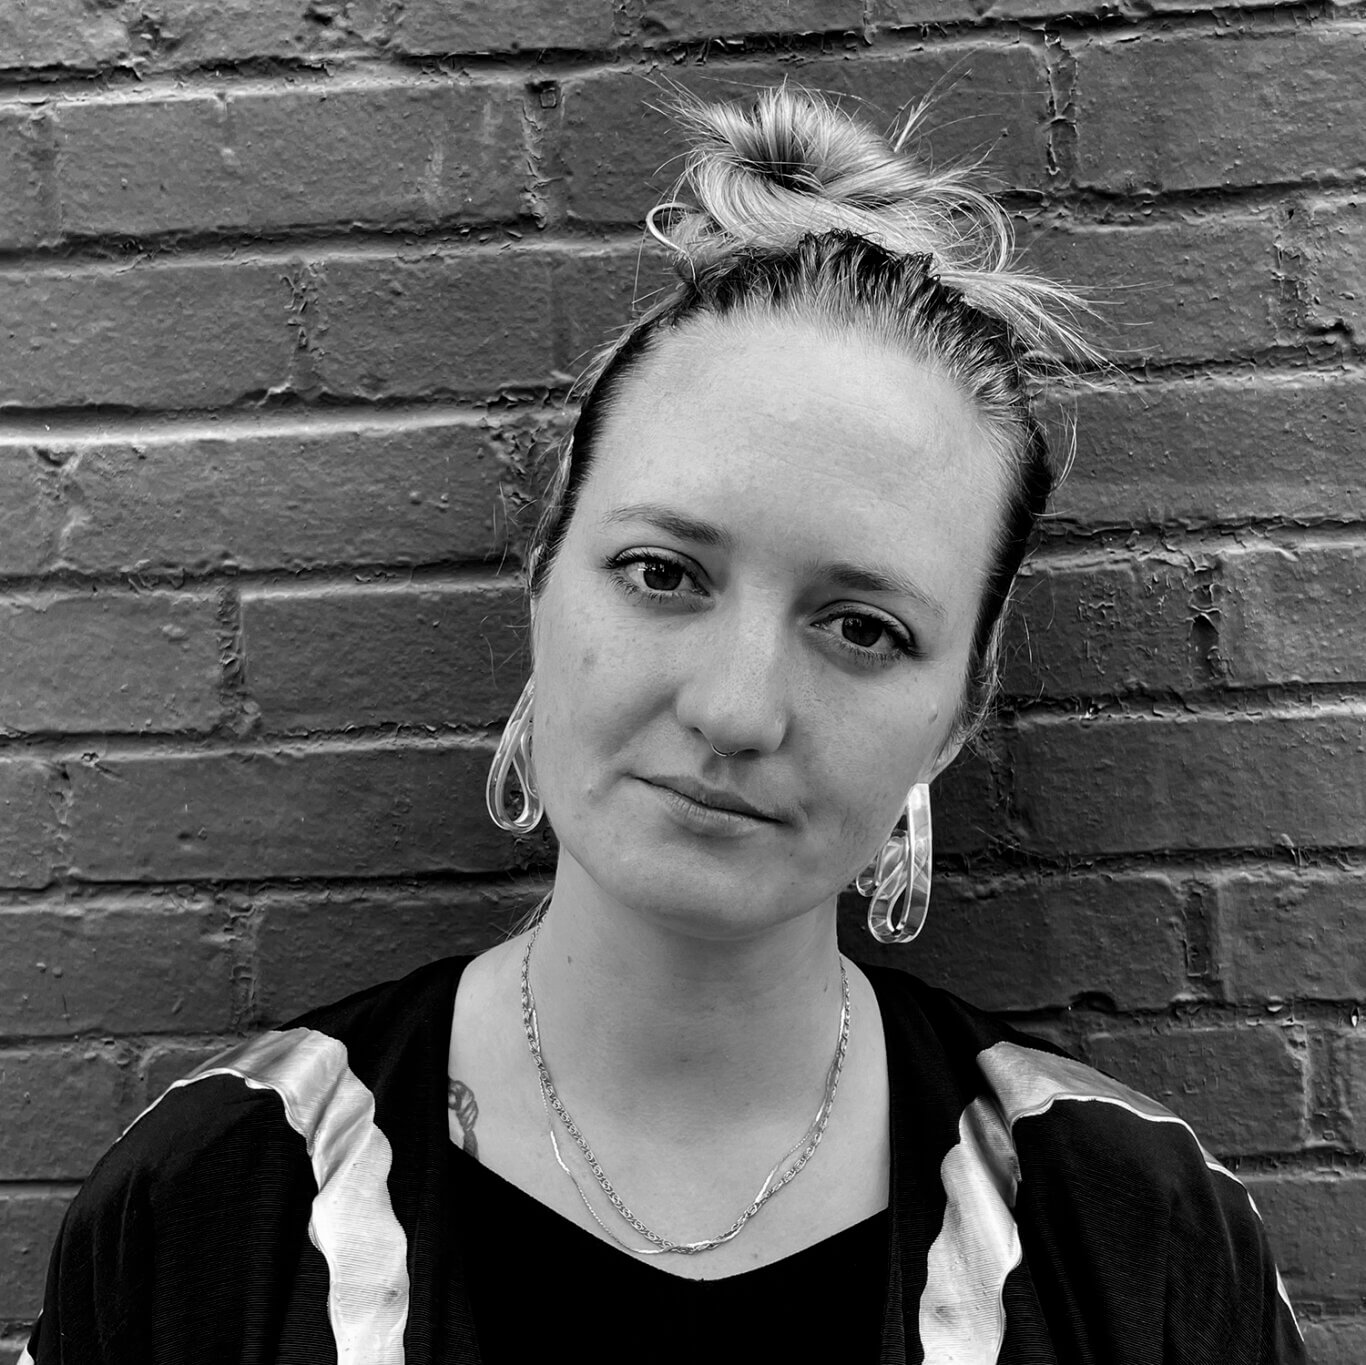 A closely cropped black and white headshot of a White nonbinary femme with light skin smiles slightly at us, their head tilted to our right. Their light hair is in a messy bun with clear abstract earrings, a small septum piercing, and two delicate chain necklaces. The edge of a tattoo of a braid peeks out from under their black jacket near their collar bone on our left. The painted brick wall behind them is slate grey.